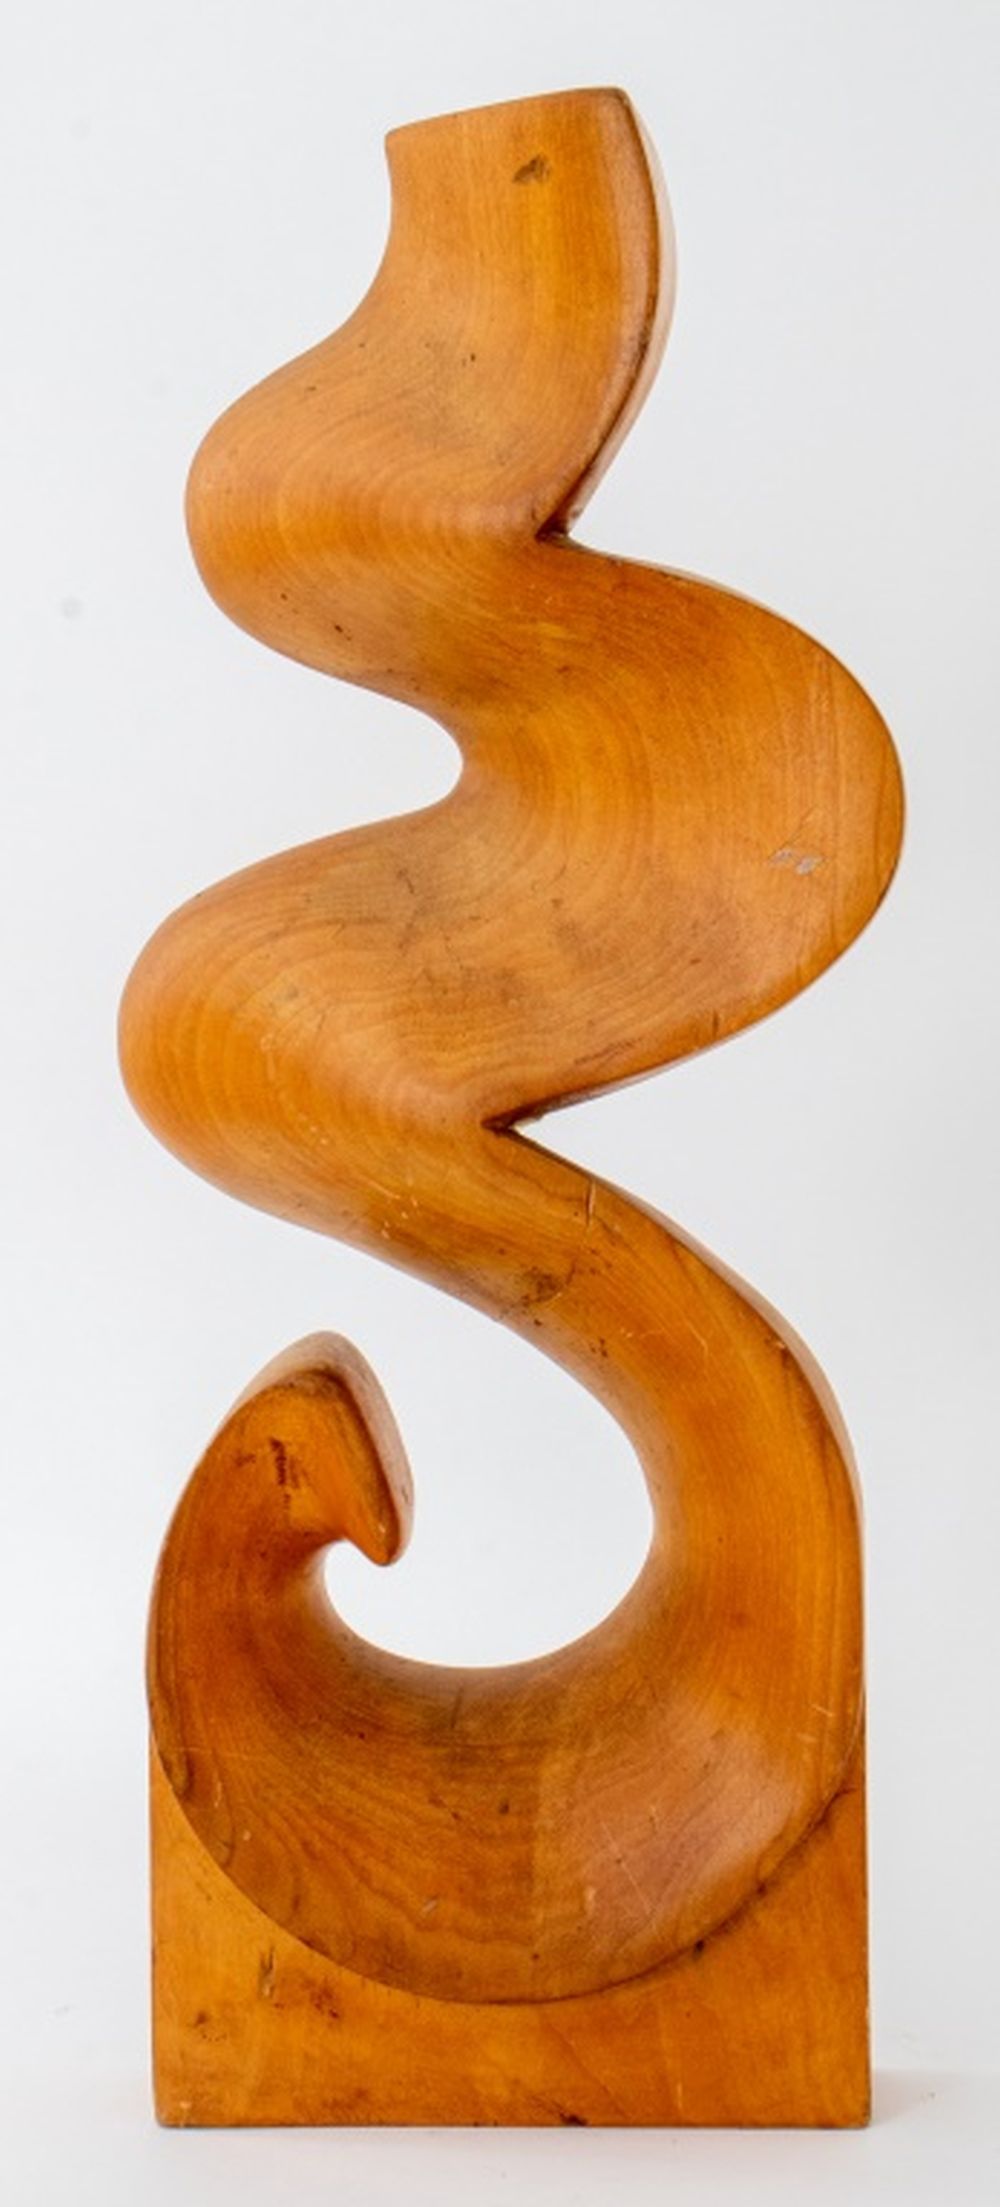 ABSTRACT FREEFORM CARVED WOOD SCULPTURE 360854